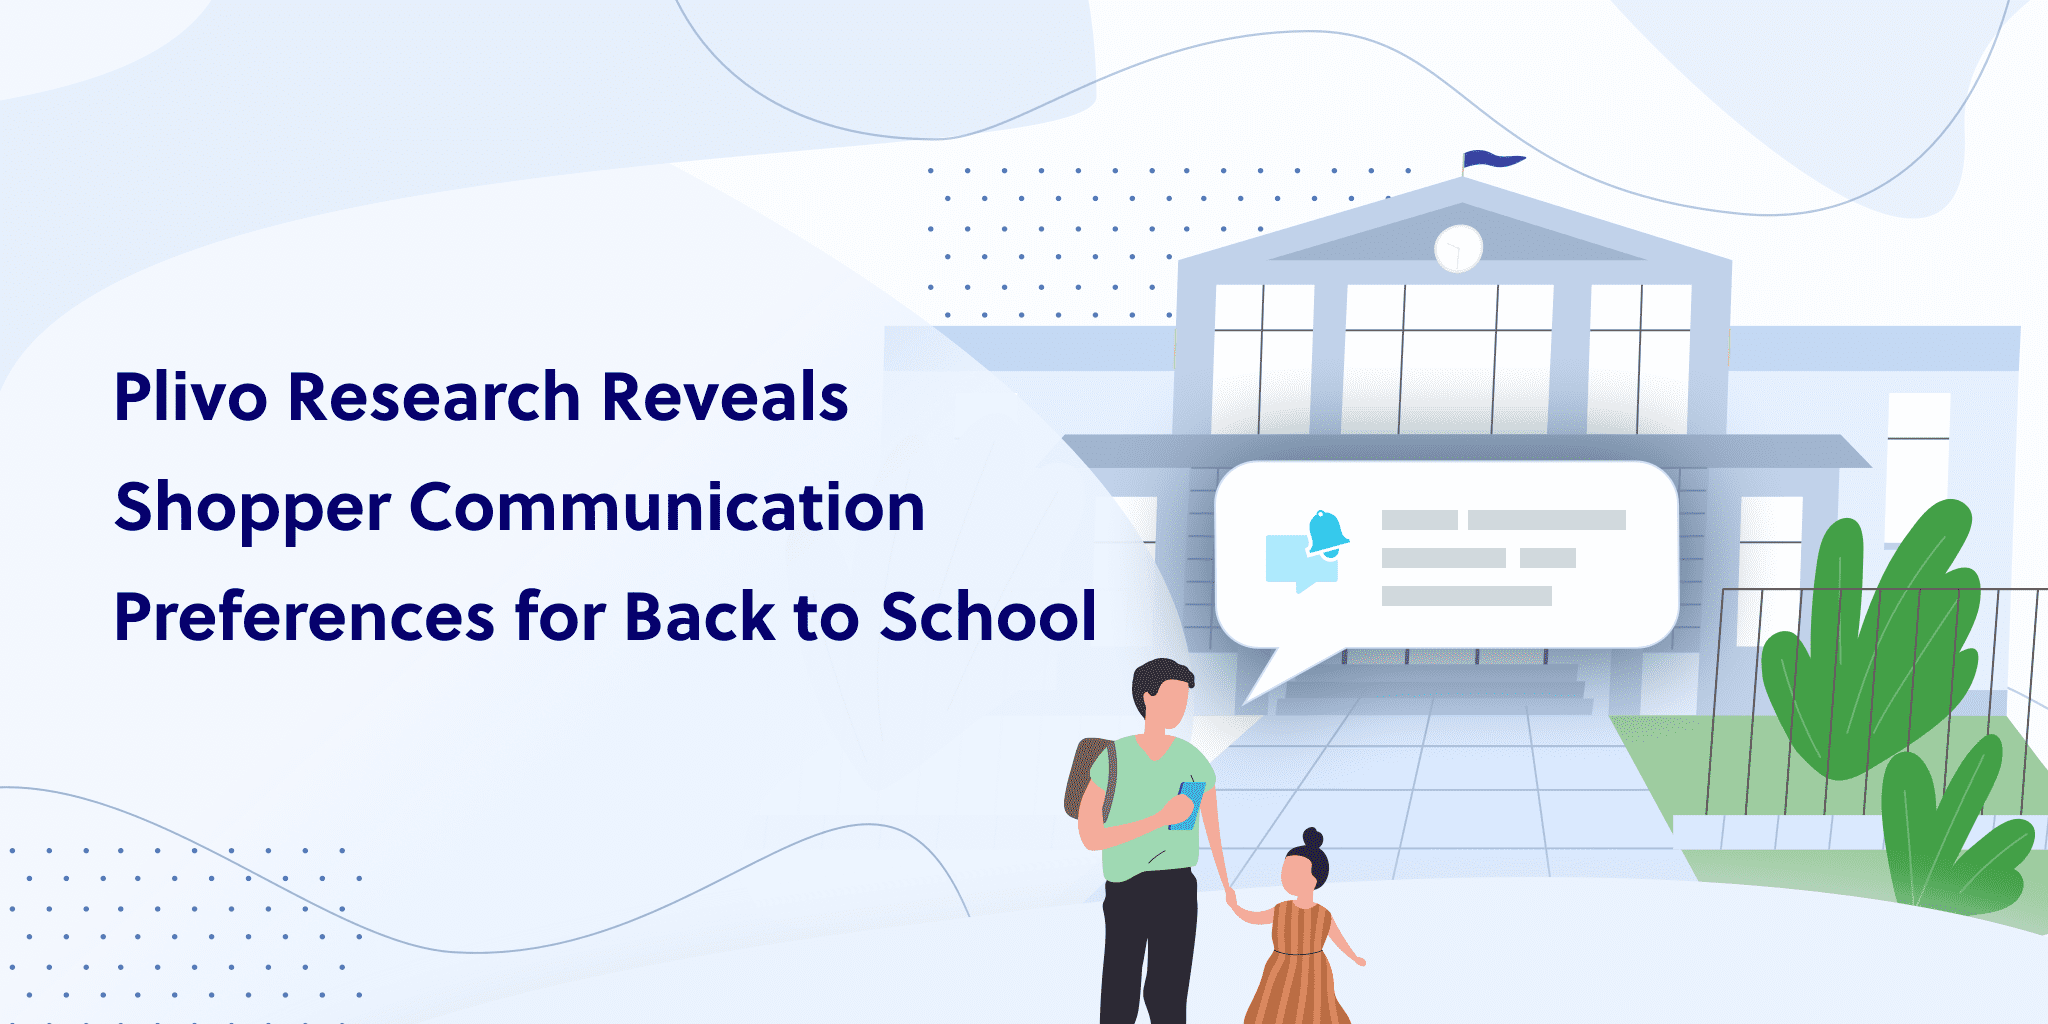 Plivo Research Reveals Shopper Communication Preferences for Back to School